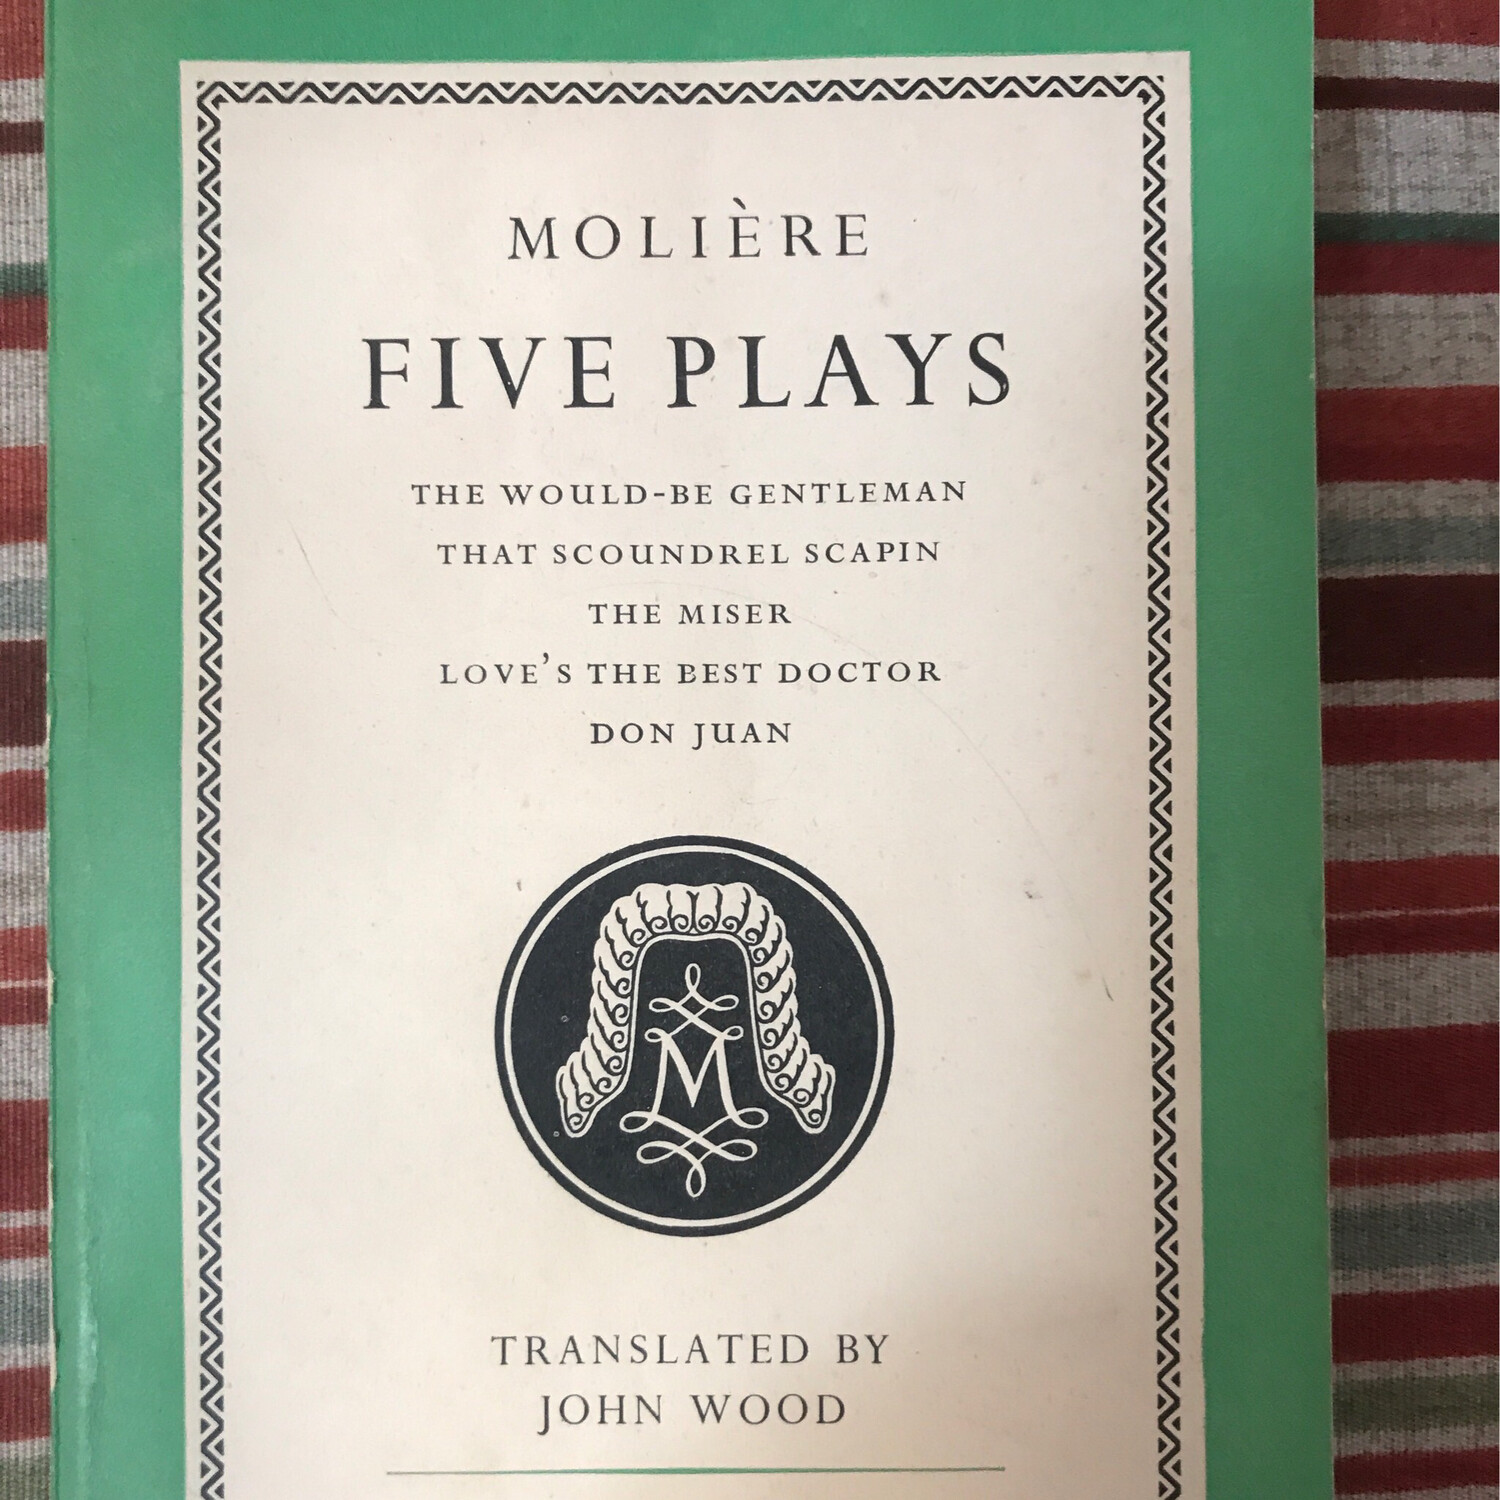 Moliere, Five Plays, Translated By John Wood